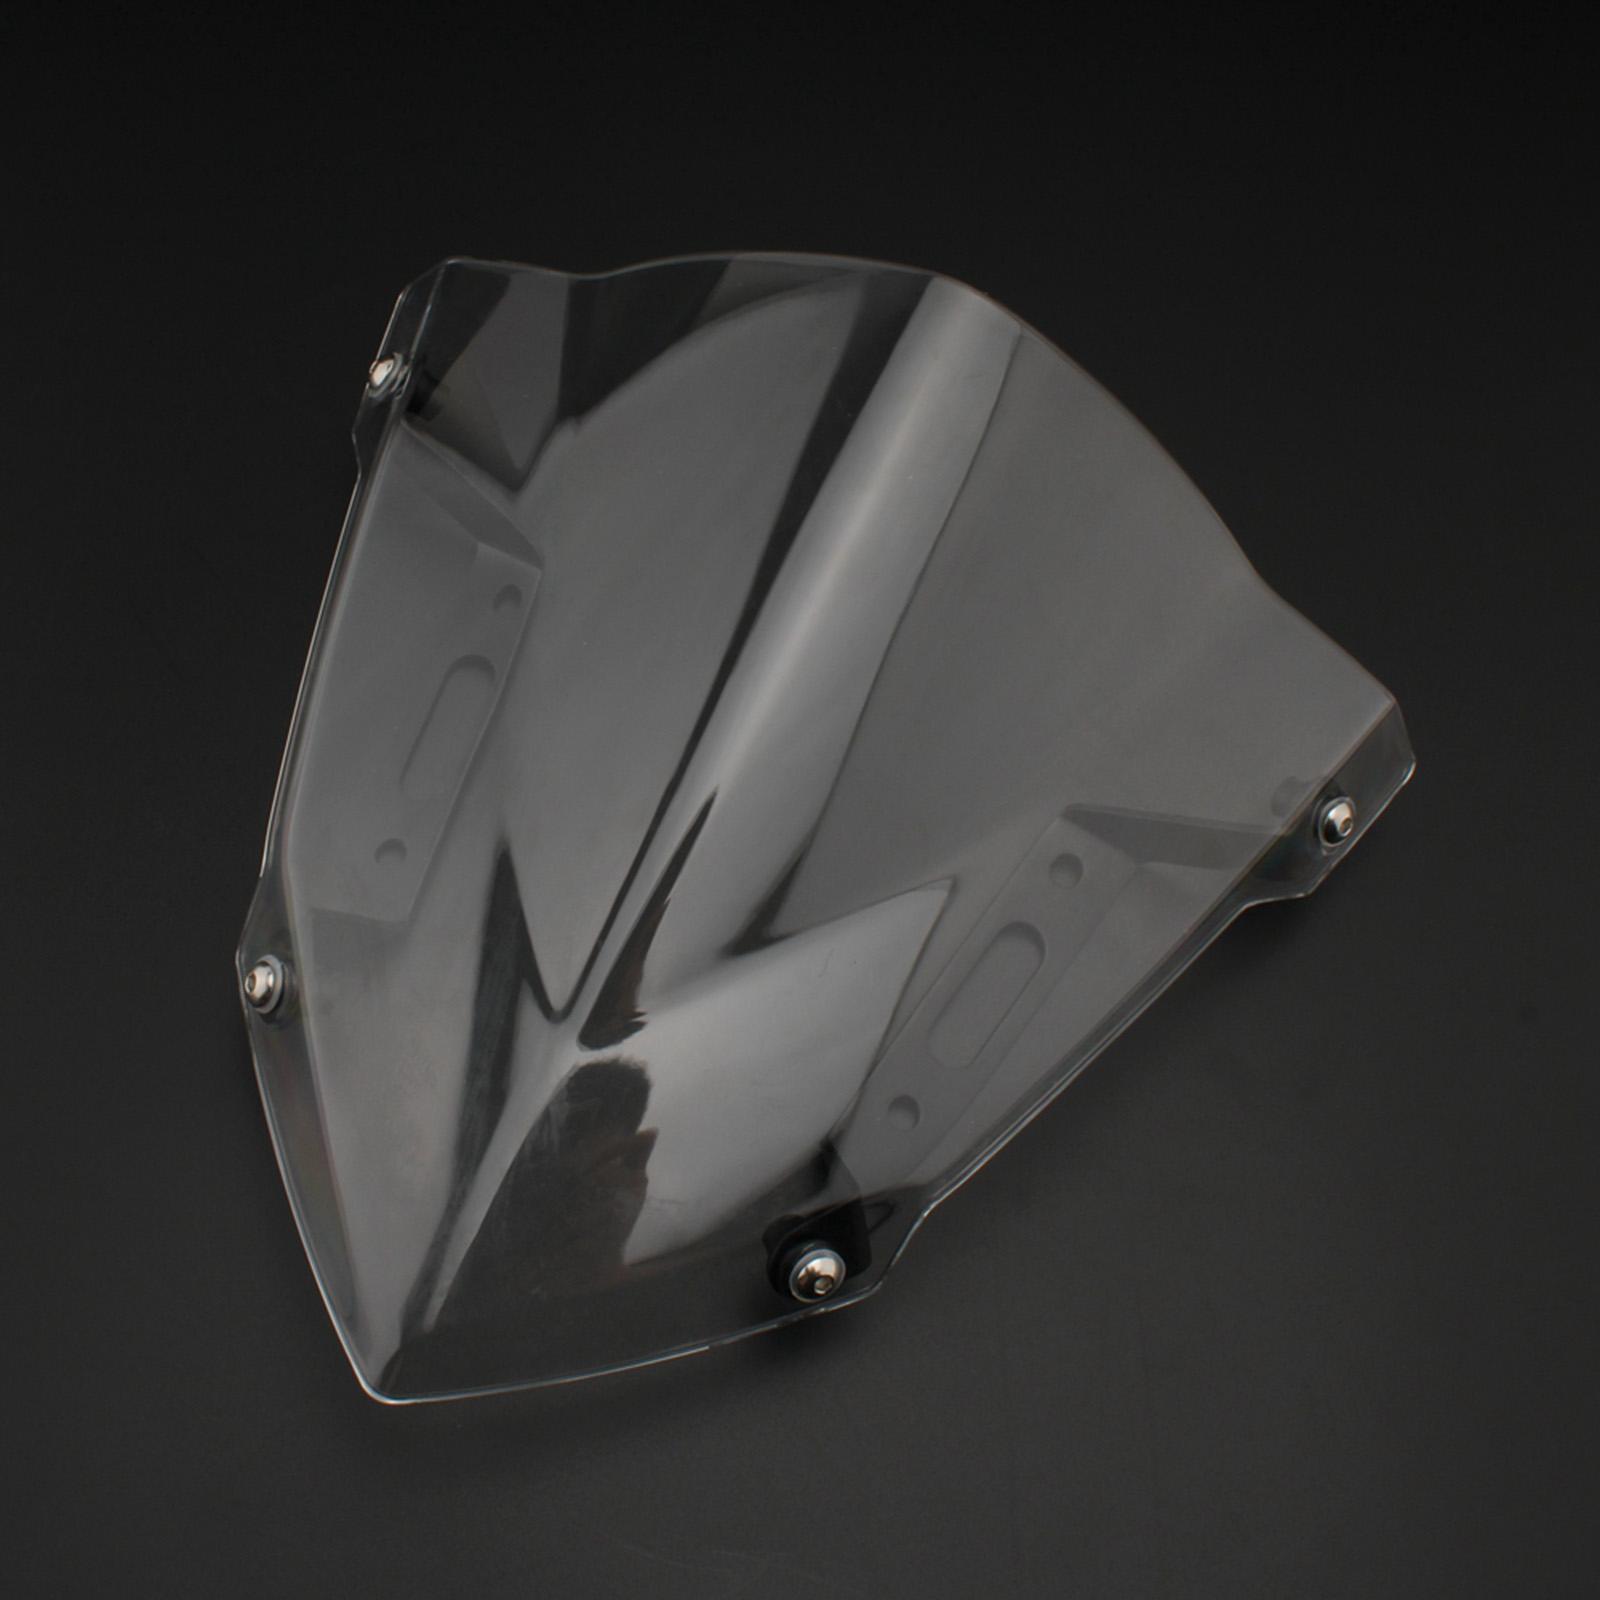 Wind deflector, for  2014-20 motorcycle accessories, - clear